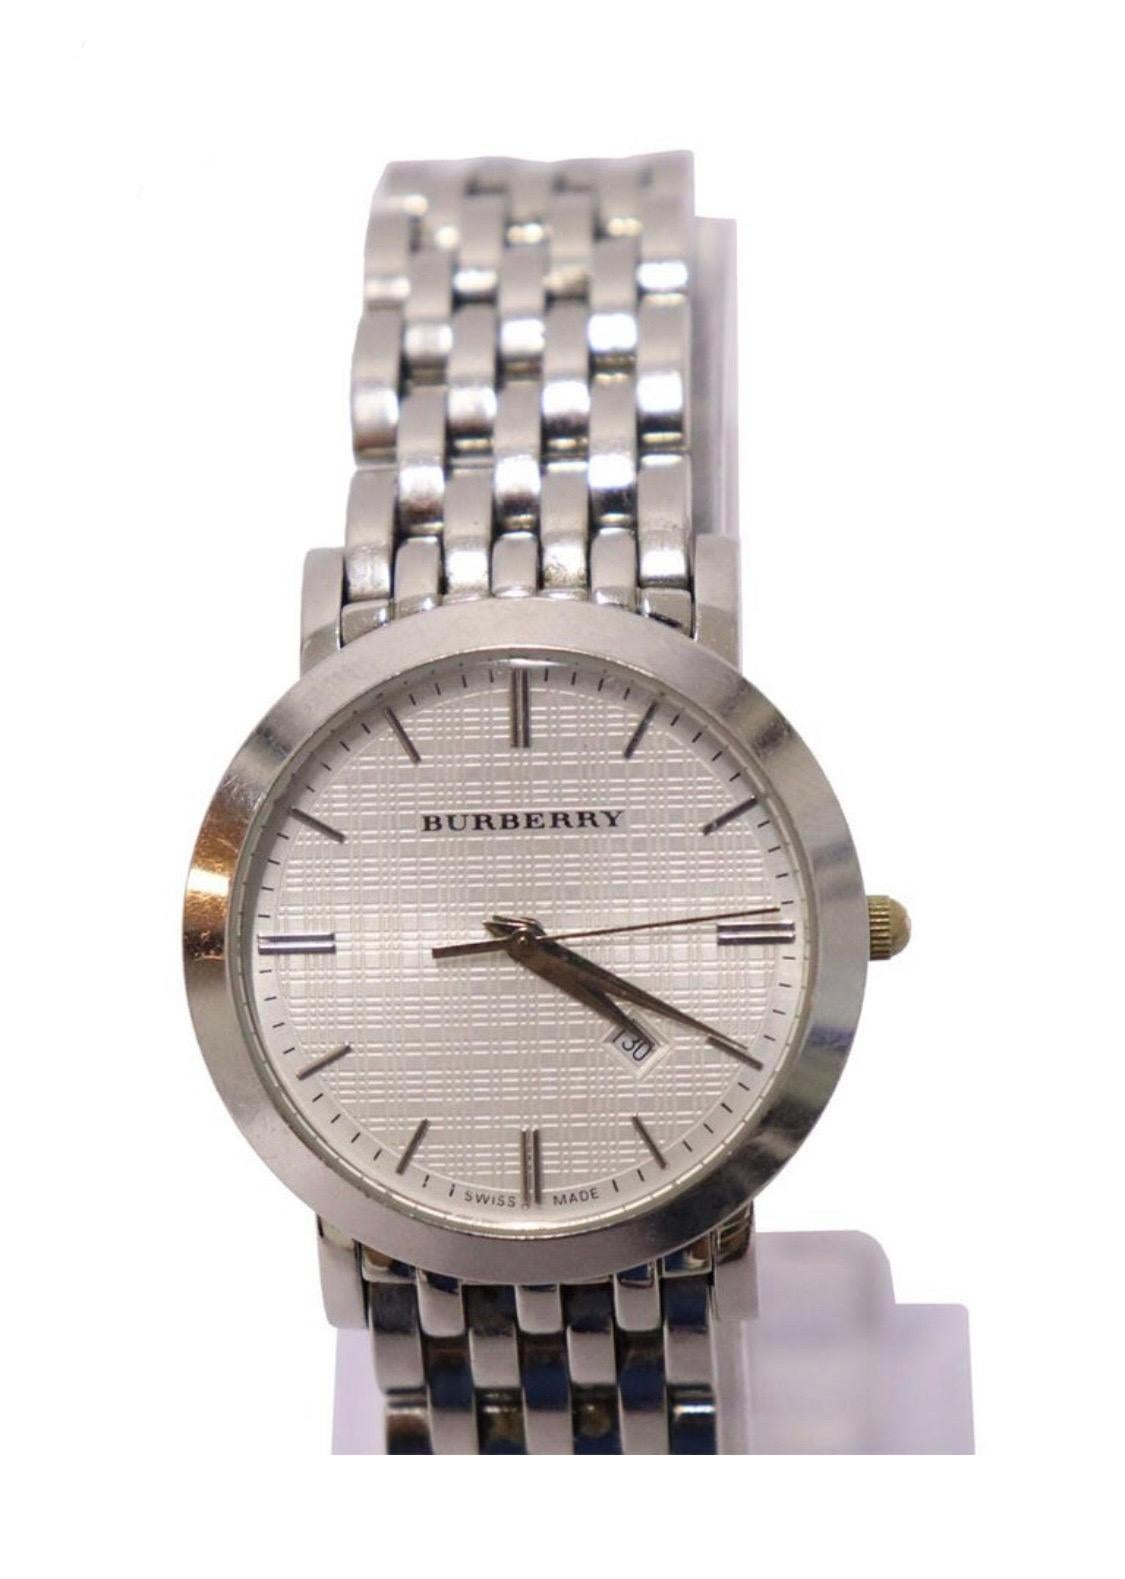 Burberry BU1722 Heritage Quartz Watch with smooth bezel, silver toned textured dial and dauphine hands.

Size: 50m
Hardware: Stainless Steel
Overall condition: Like New
Includes Original Box